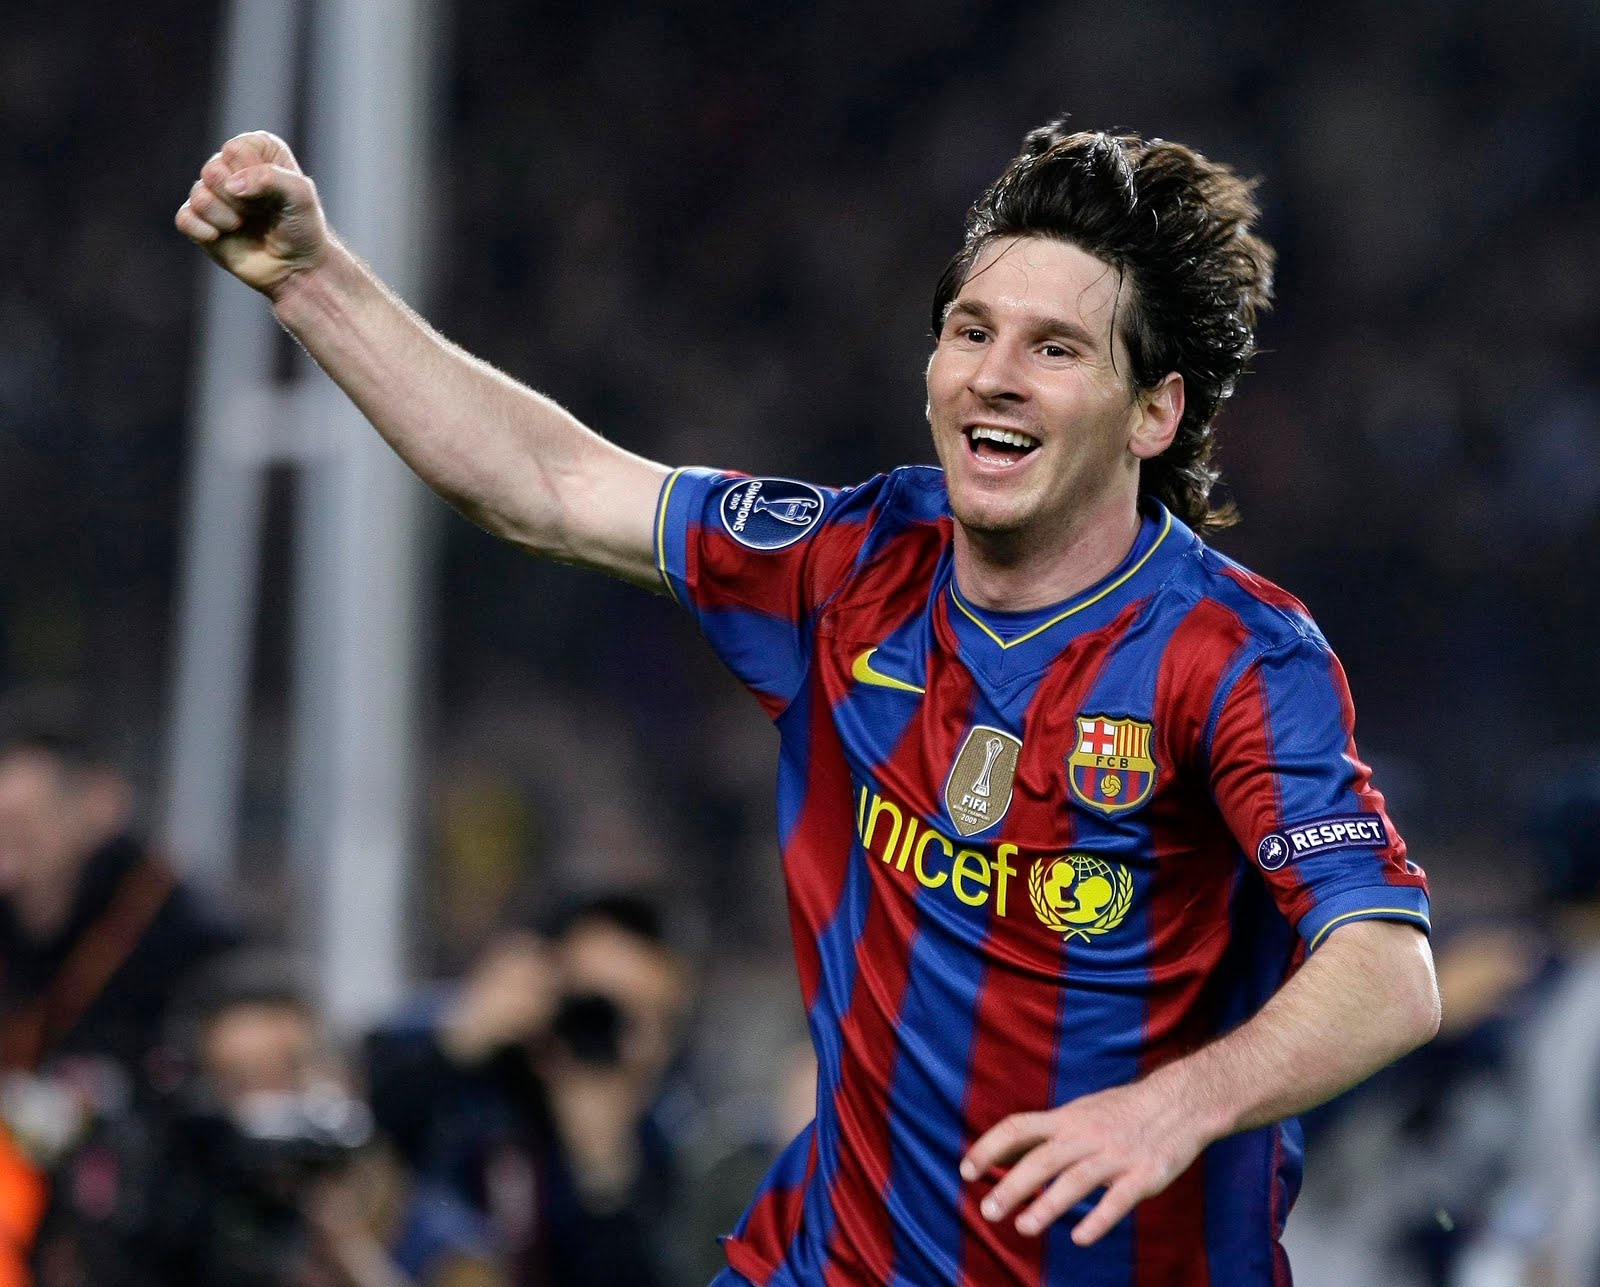  Players Lionel Messi Wallpapers HD   Messi Latest Wallpapers 2012 1600x1287